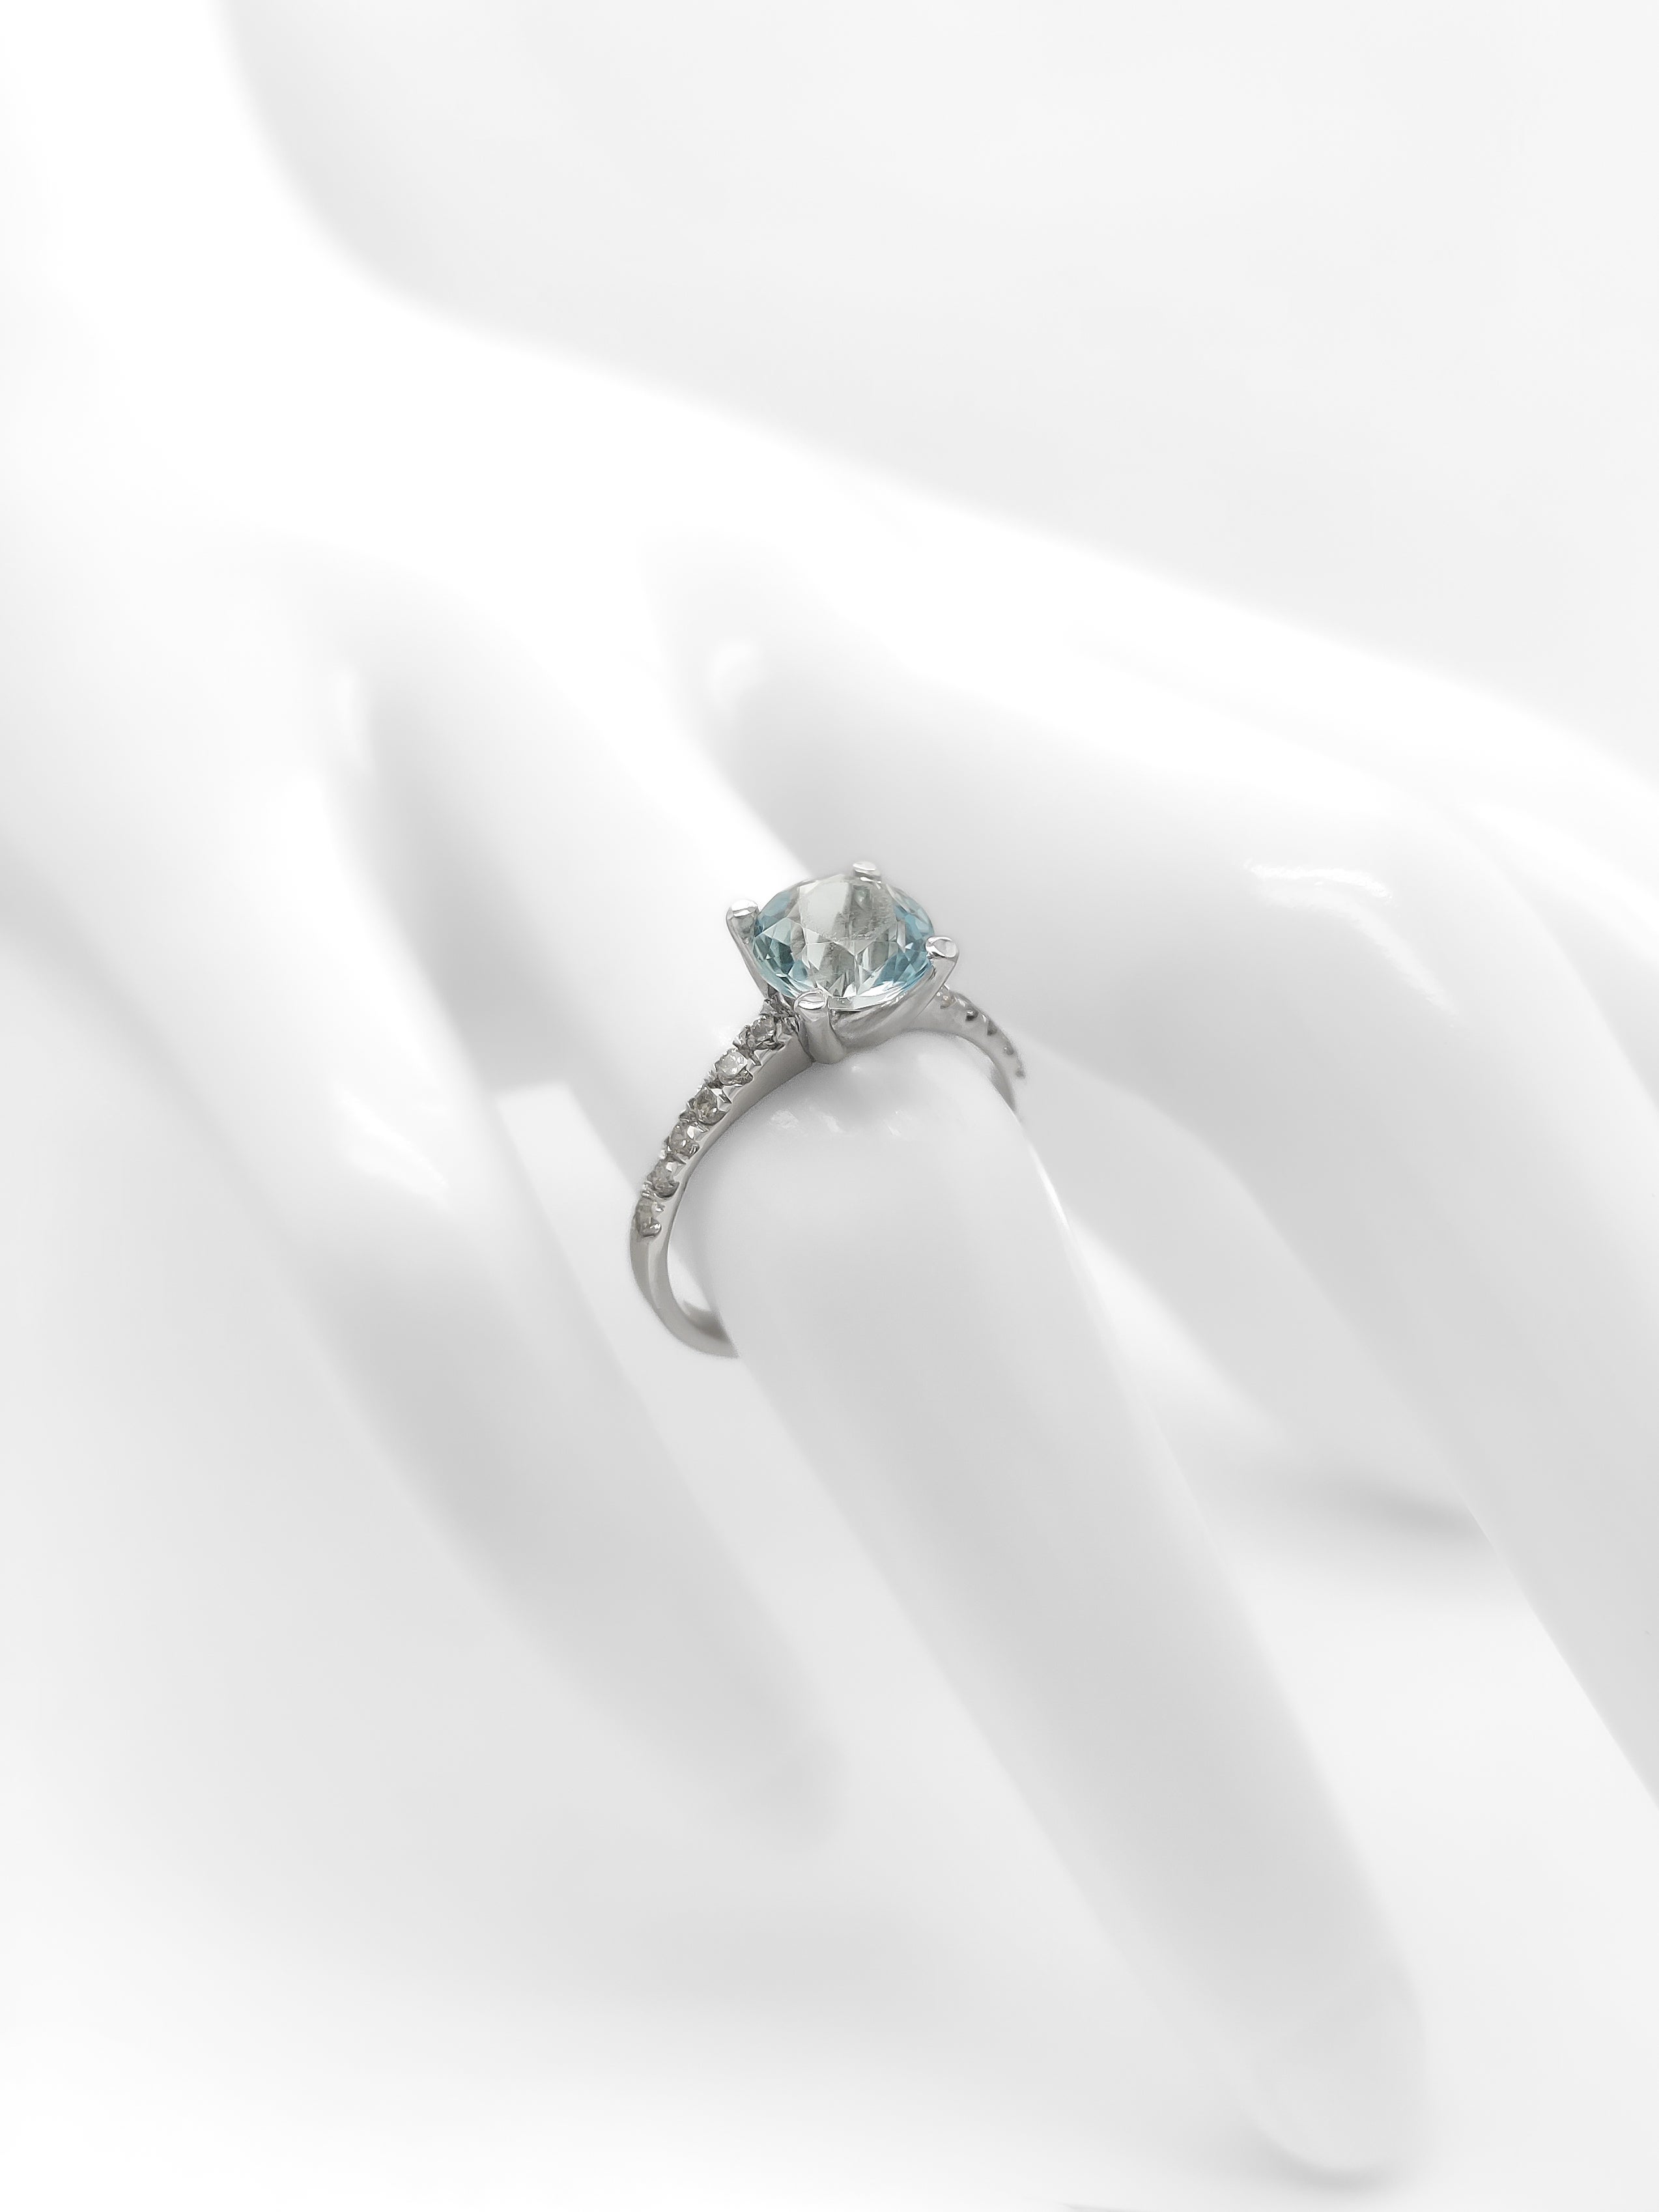 NO RESERVE 1.47CTW Aquamarine and Diamond Engagement 14K White Gold Ring For Sale